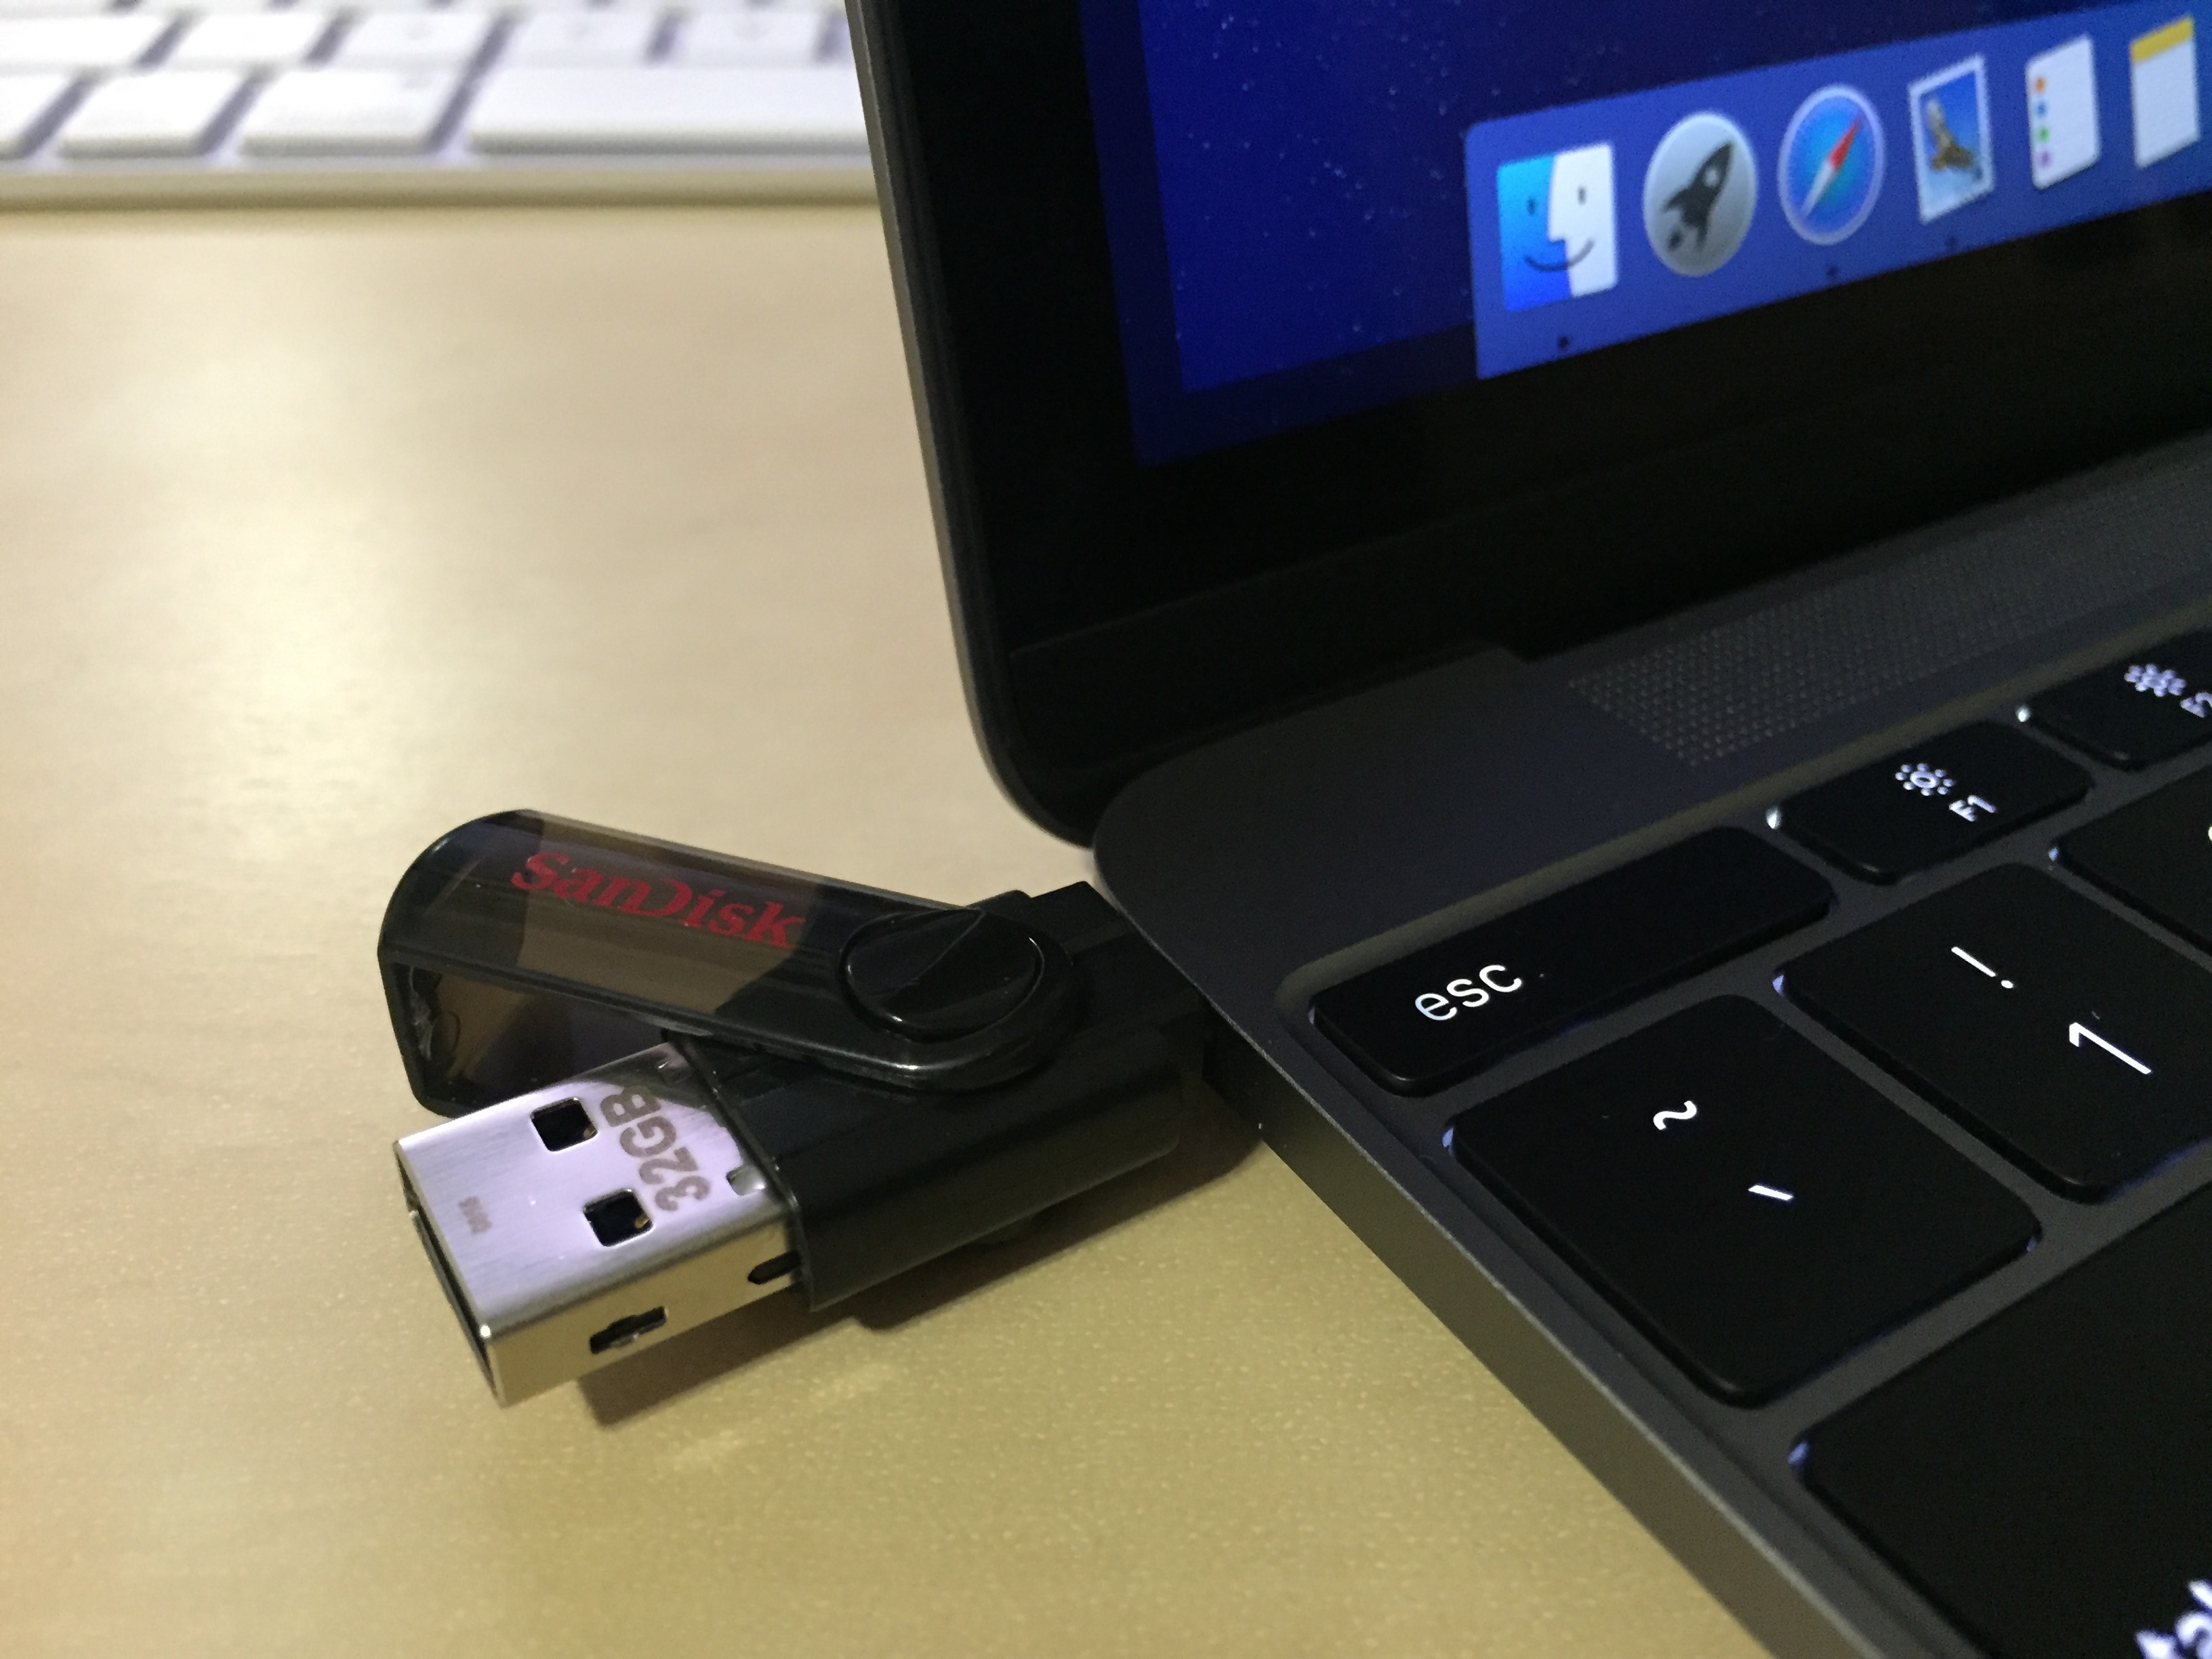 how to transfer data from macbook to pendrive